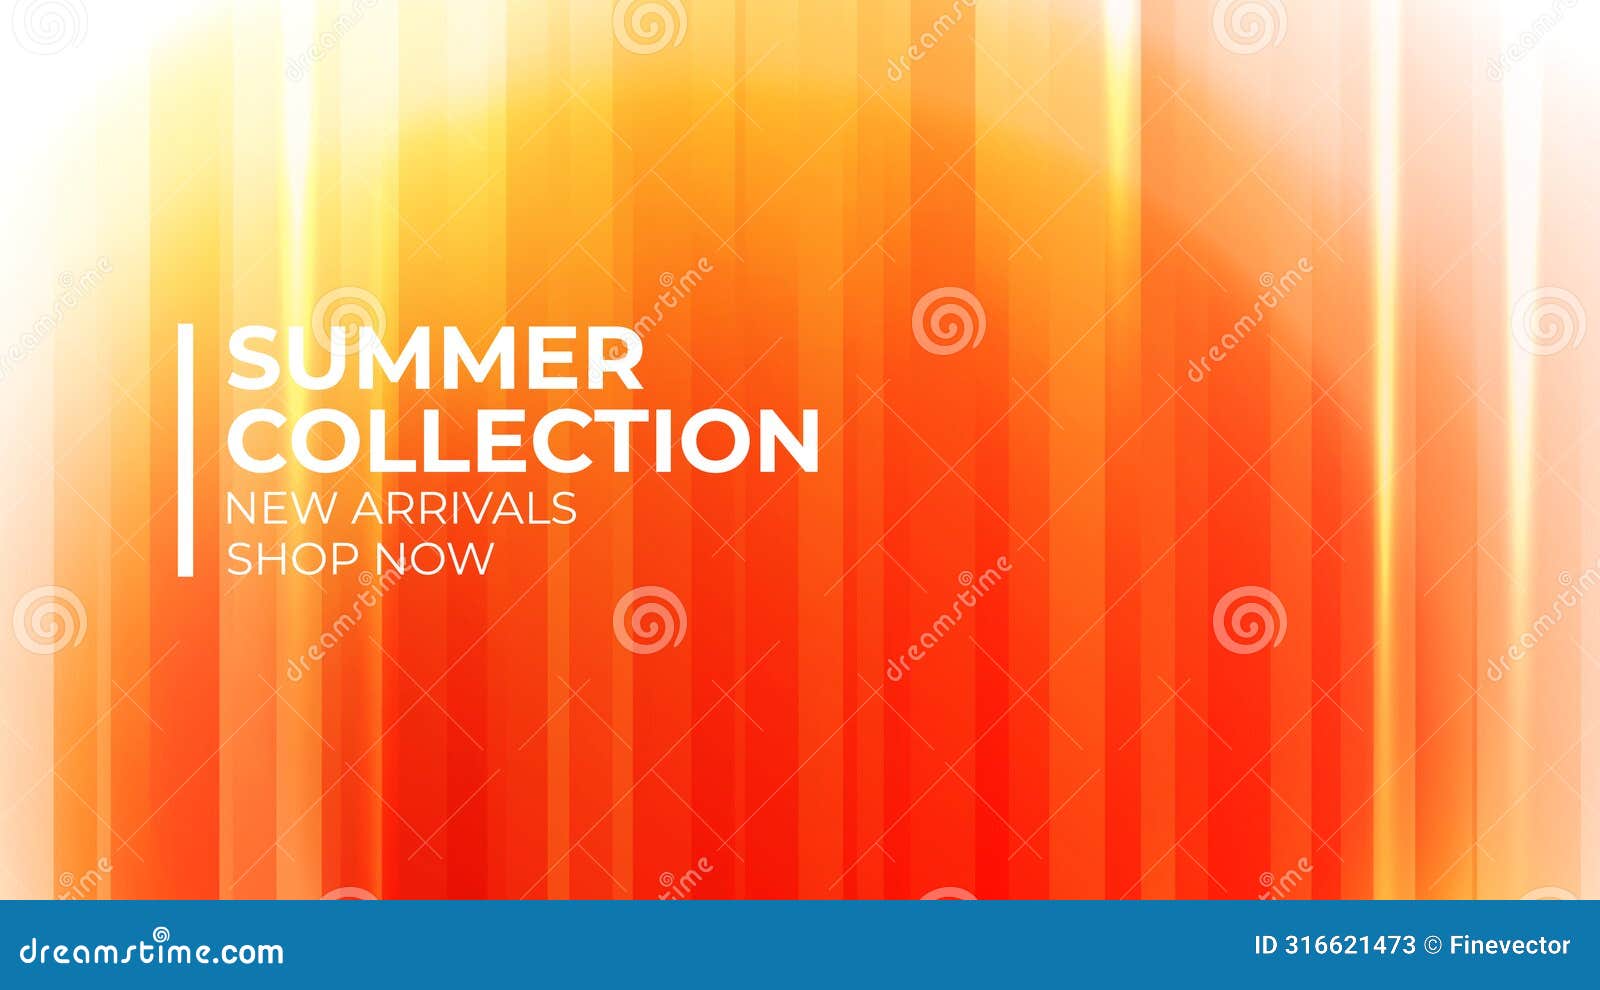 summer collection. new arrivals promotional banner. summertime season abstract blurred background.